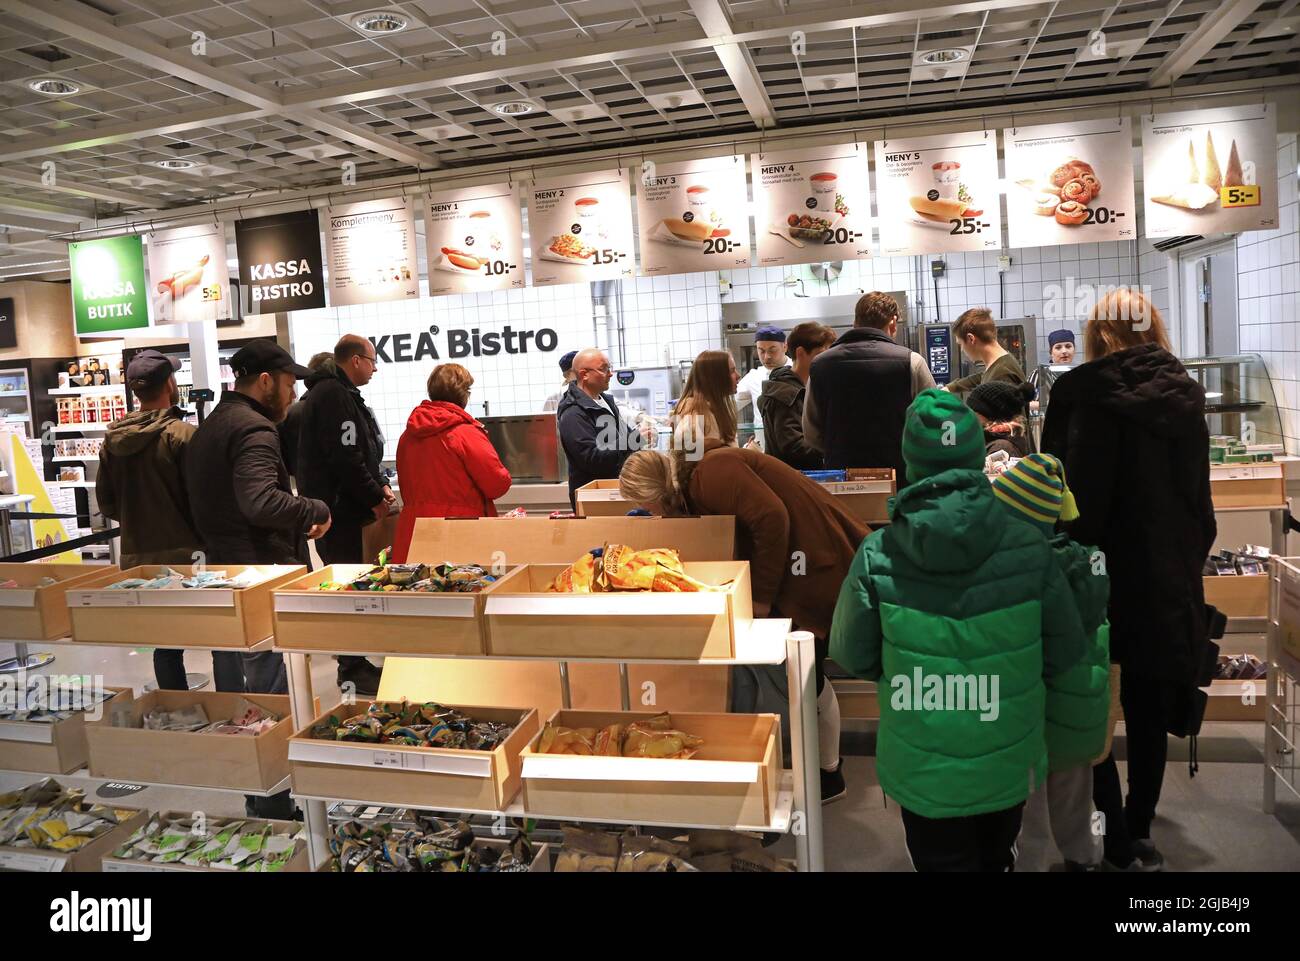 LINKOPING 20180128 Customers at the IKEA store in Linkoping, Sweden, on Jan. 28, 2018. Ingvar Kamprad, founder of Swedish multinational furniture retailer IKEA has died at an age of 91. Photo Jeppe Gustafsson / TT / code 71935 ** BETALBILD **  Stock Photo